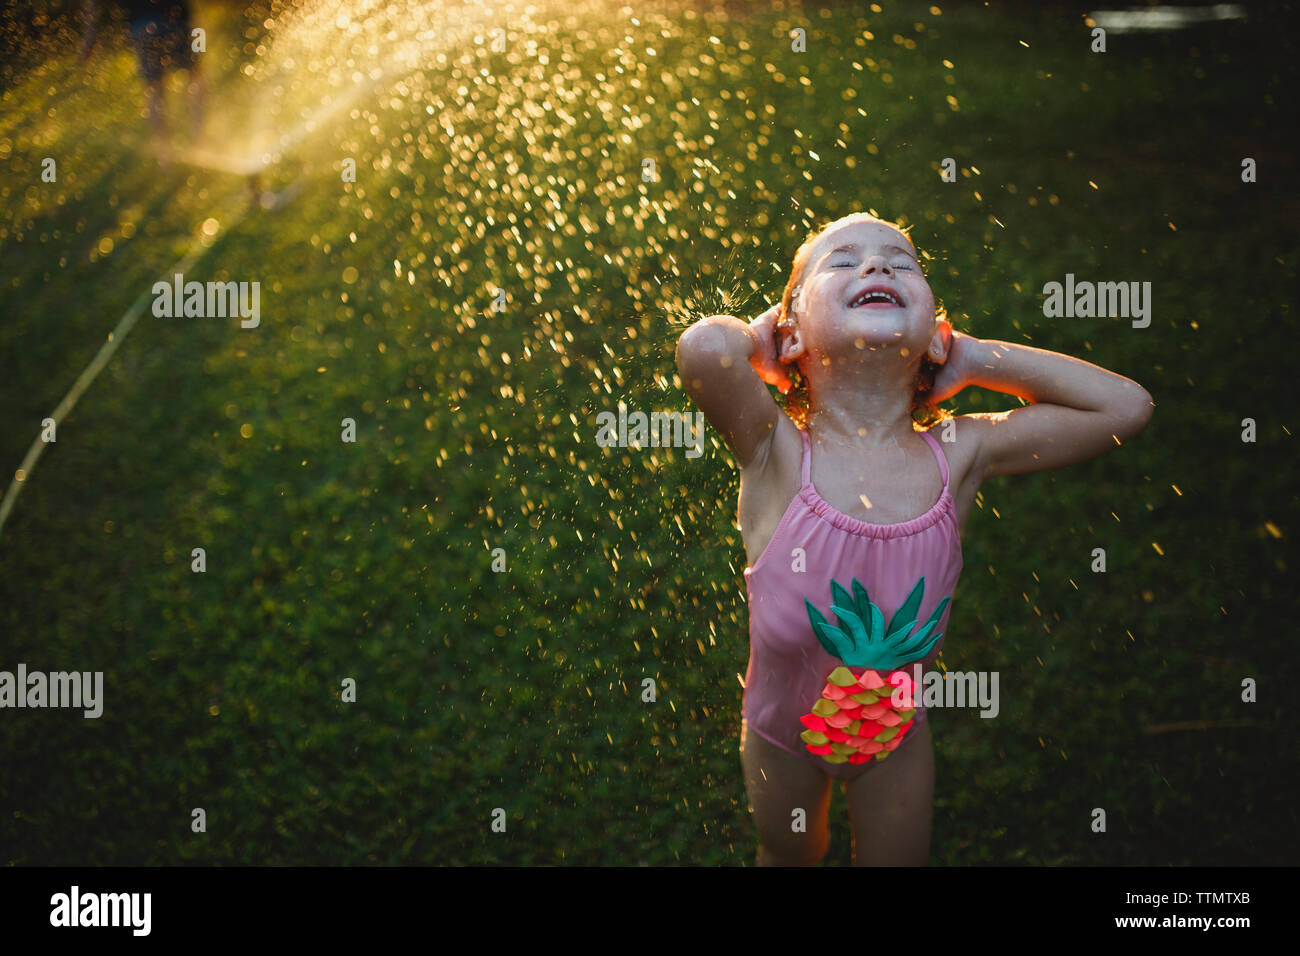 A young girl wearing bathing suit playing on the grass with sprinkler Stock Photo